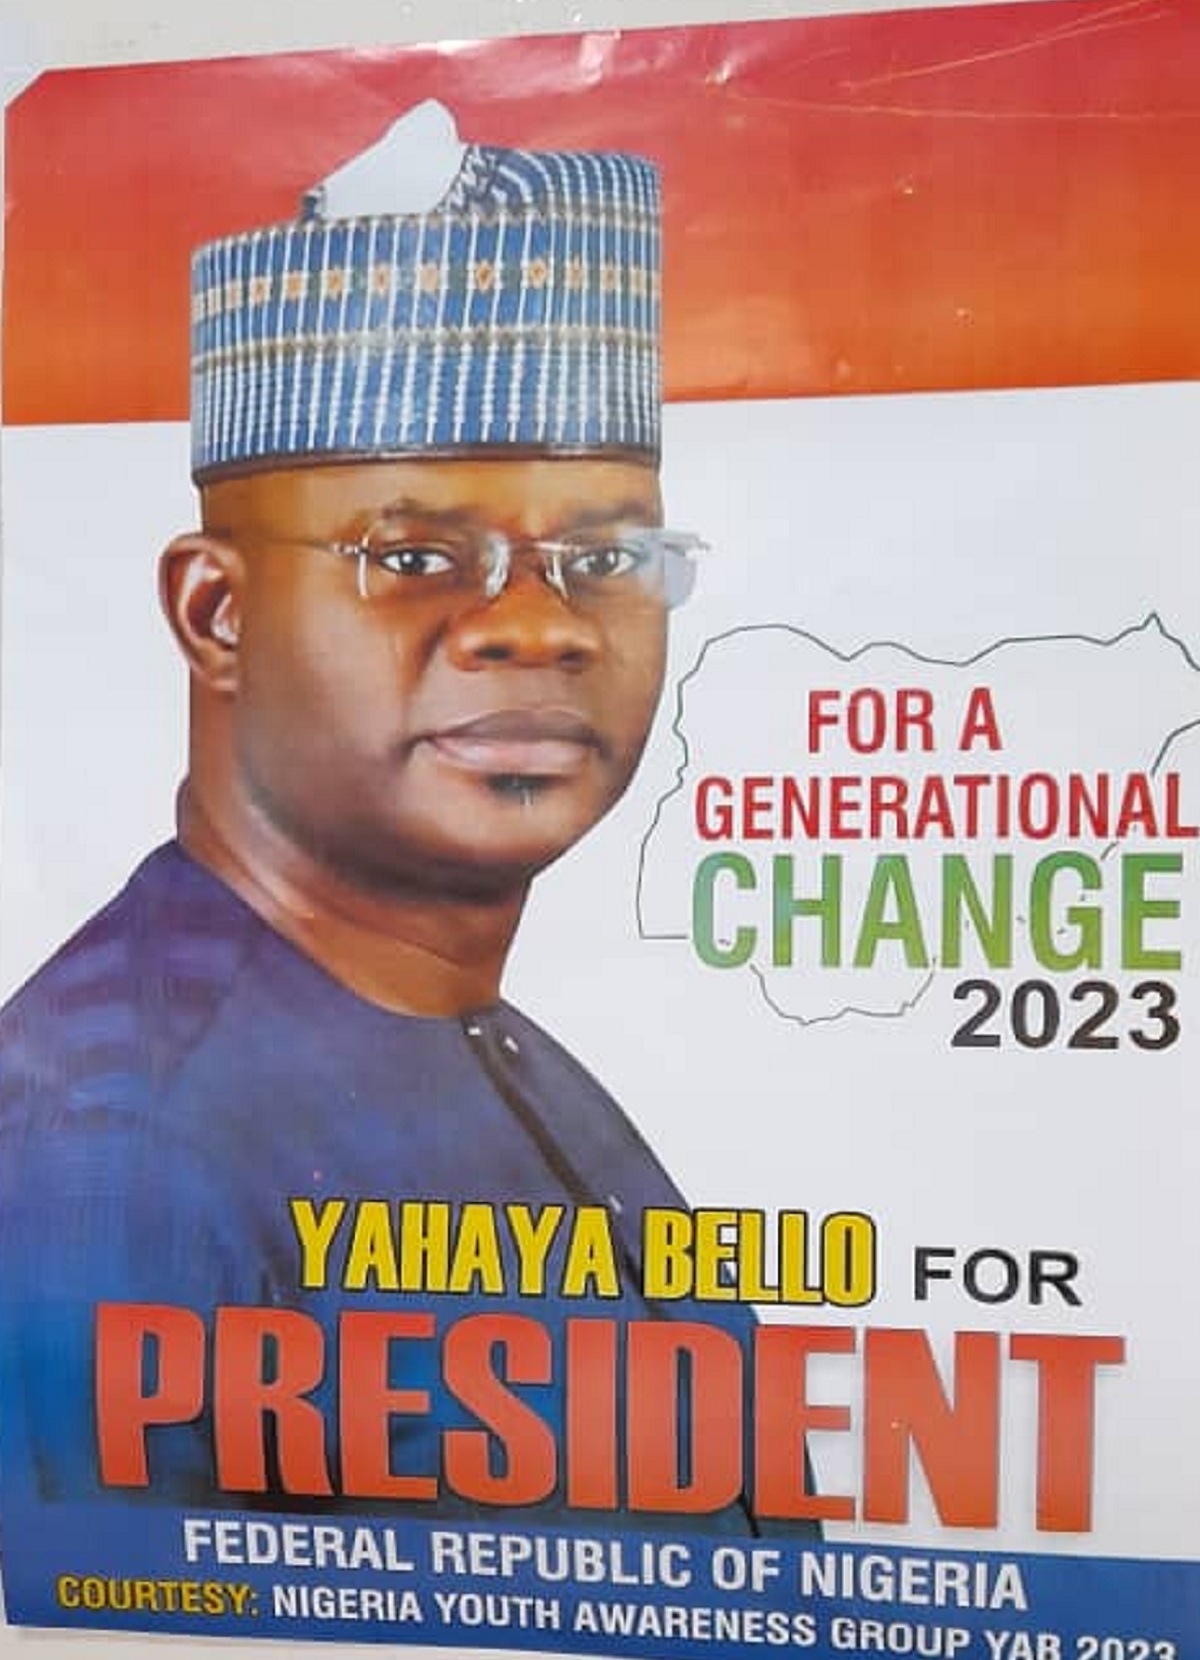 Yahaya Bello presidential campaign posters flood Kano Ahead of 2023 polls